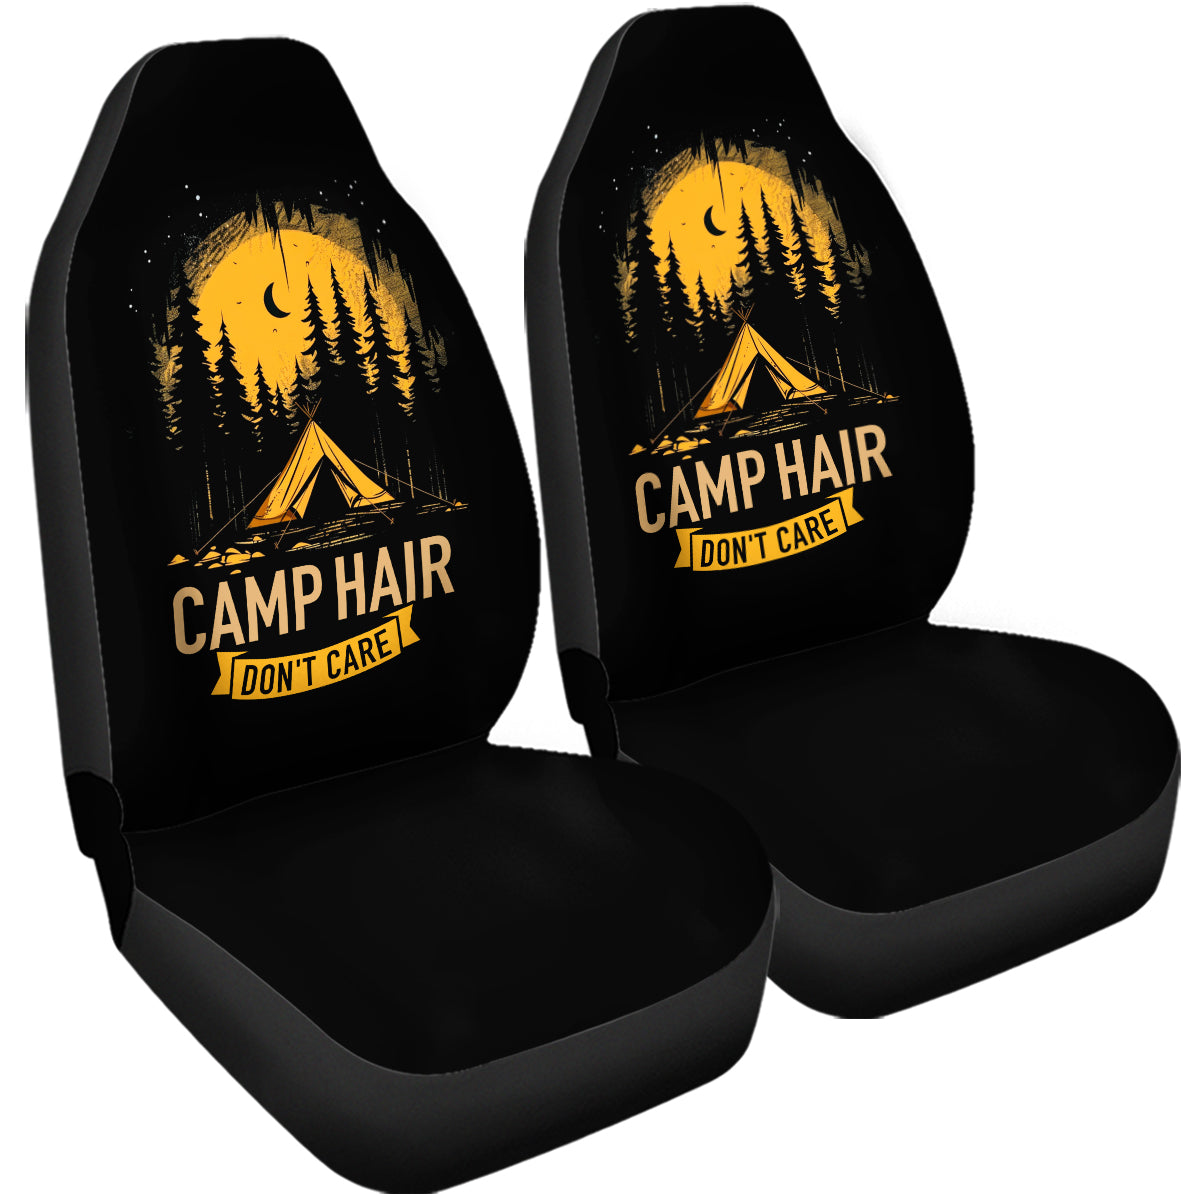 Camping Hair Don't Care Car Seat Covers Washable Breathable Car Seat Wrap Universal Fits Most Auto Truck Van SUV Car Seat Wrap, Camp Hair Don't Care 01